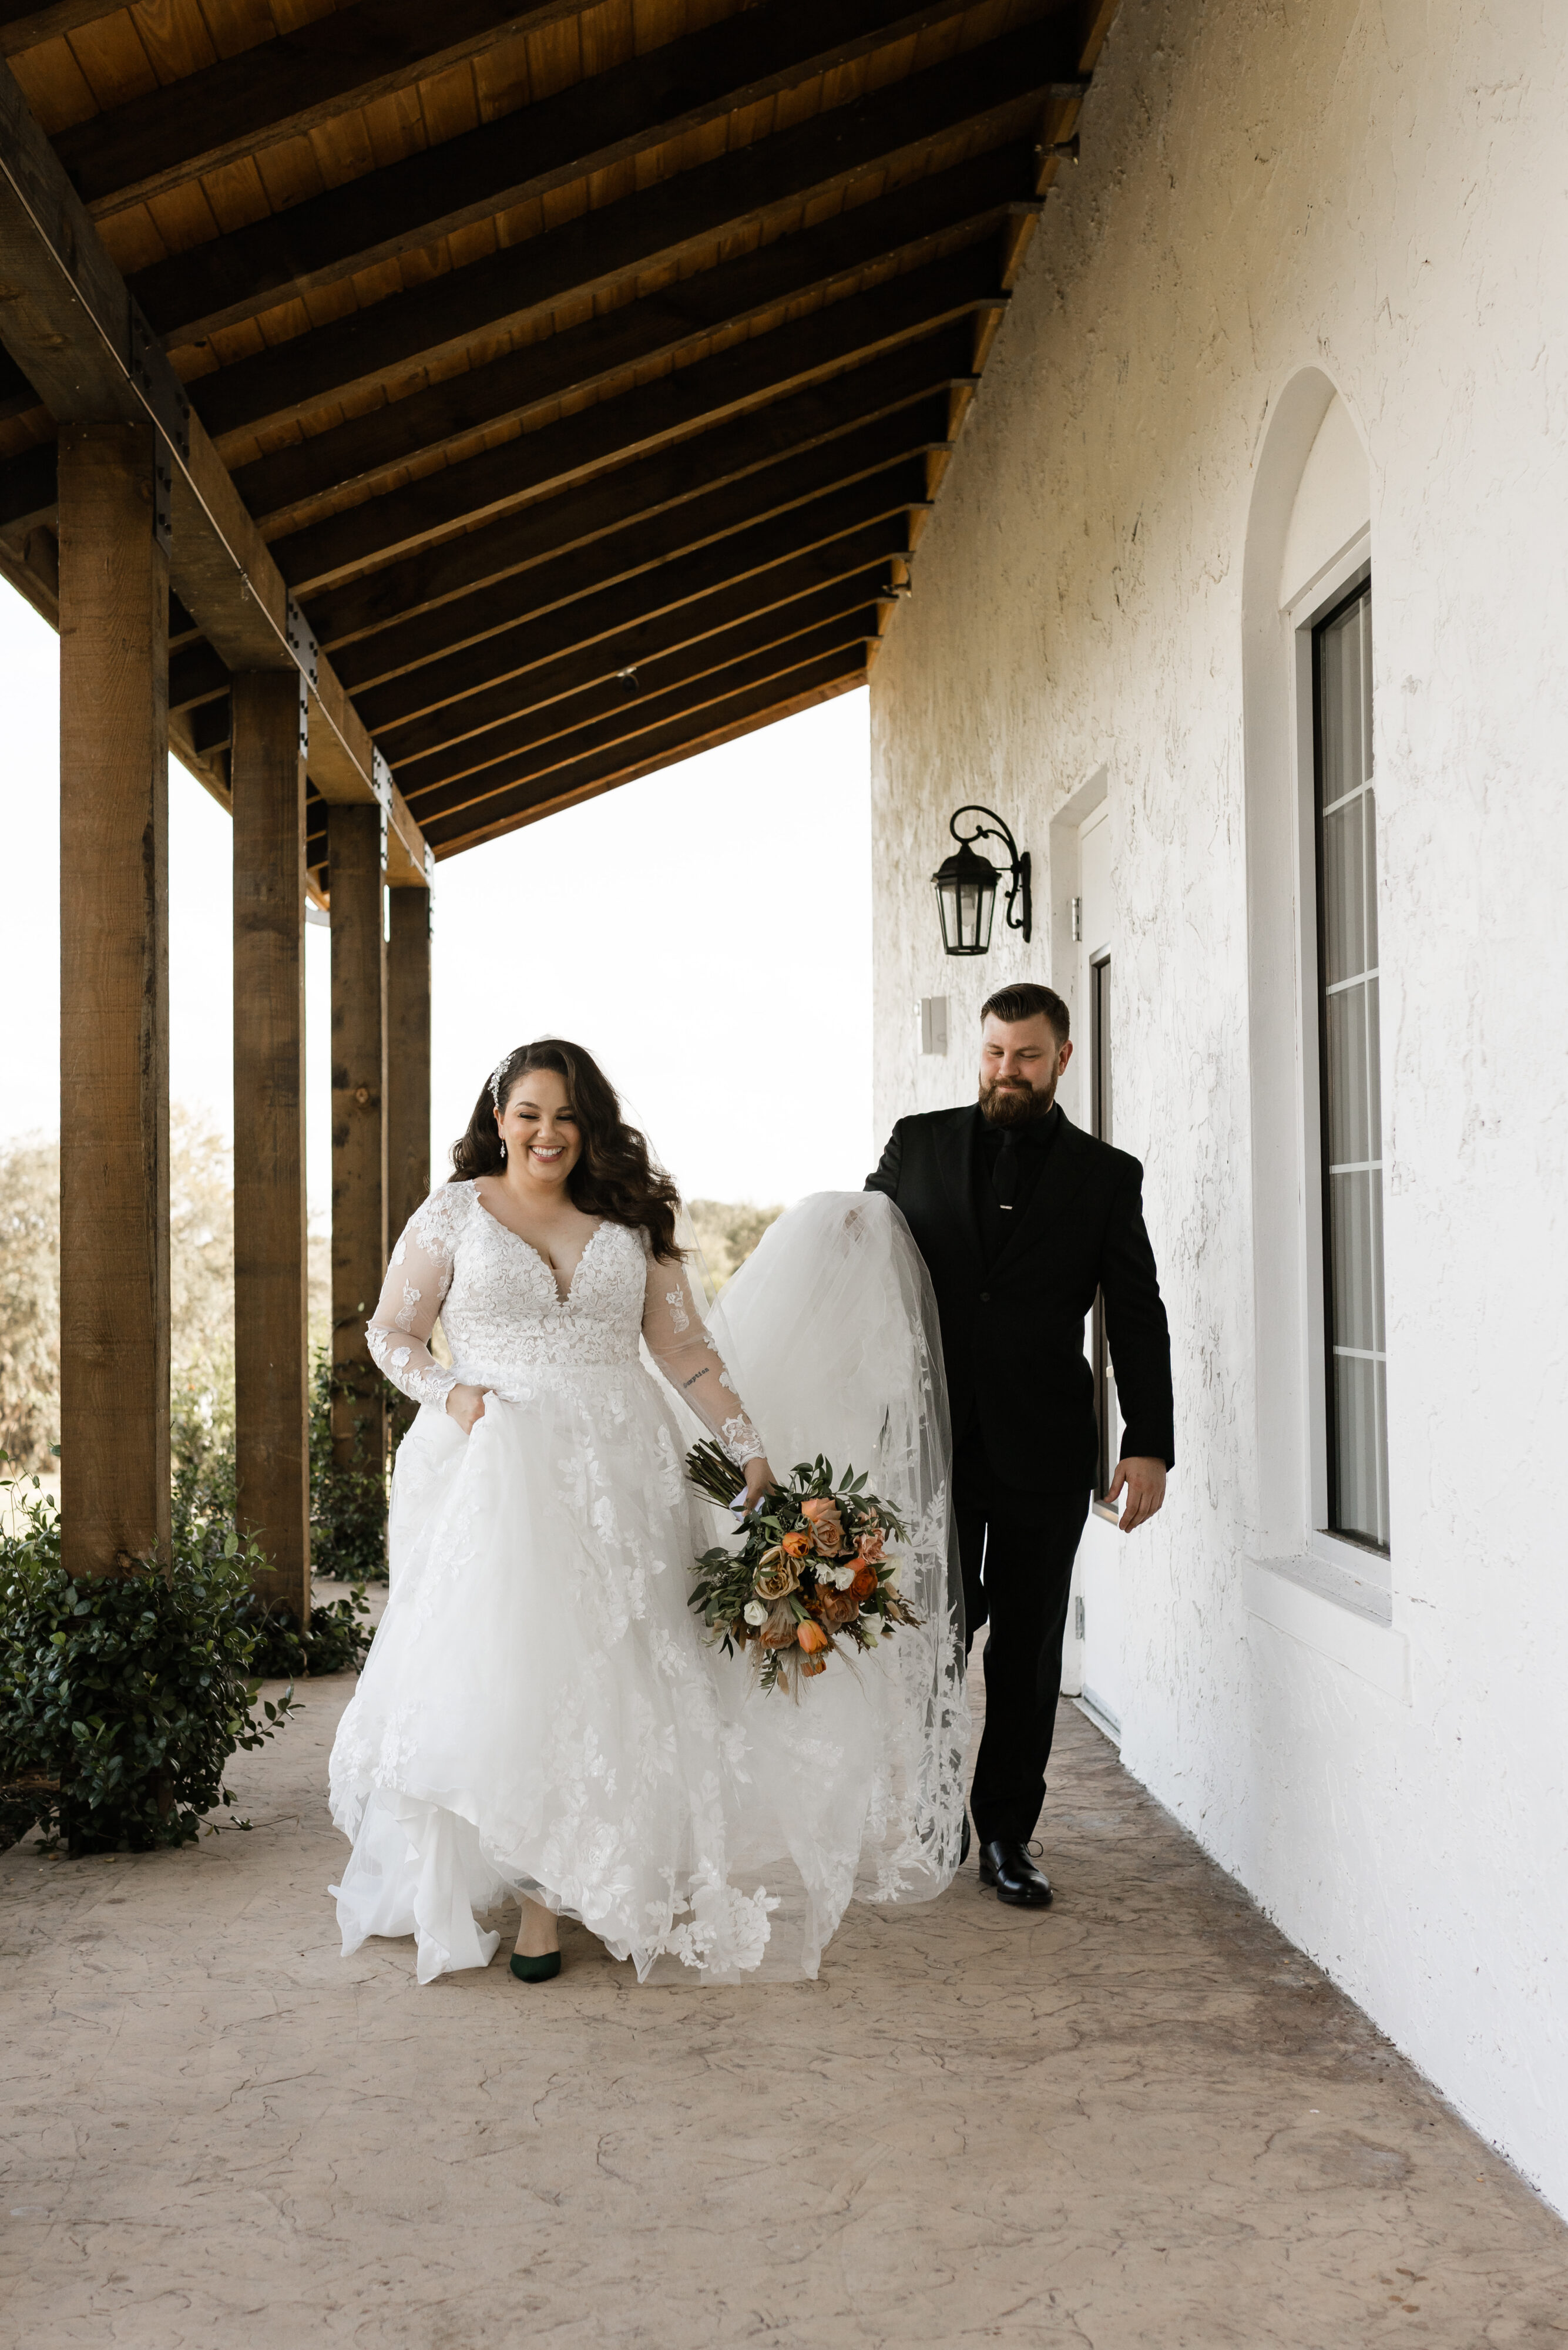 wedding photo of a brinde and groom walking together as the groom holds the dress